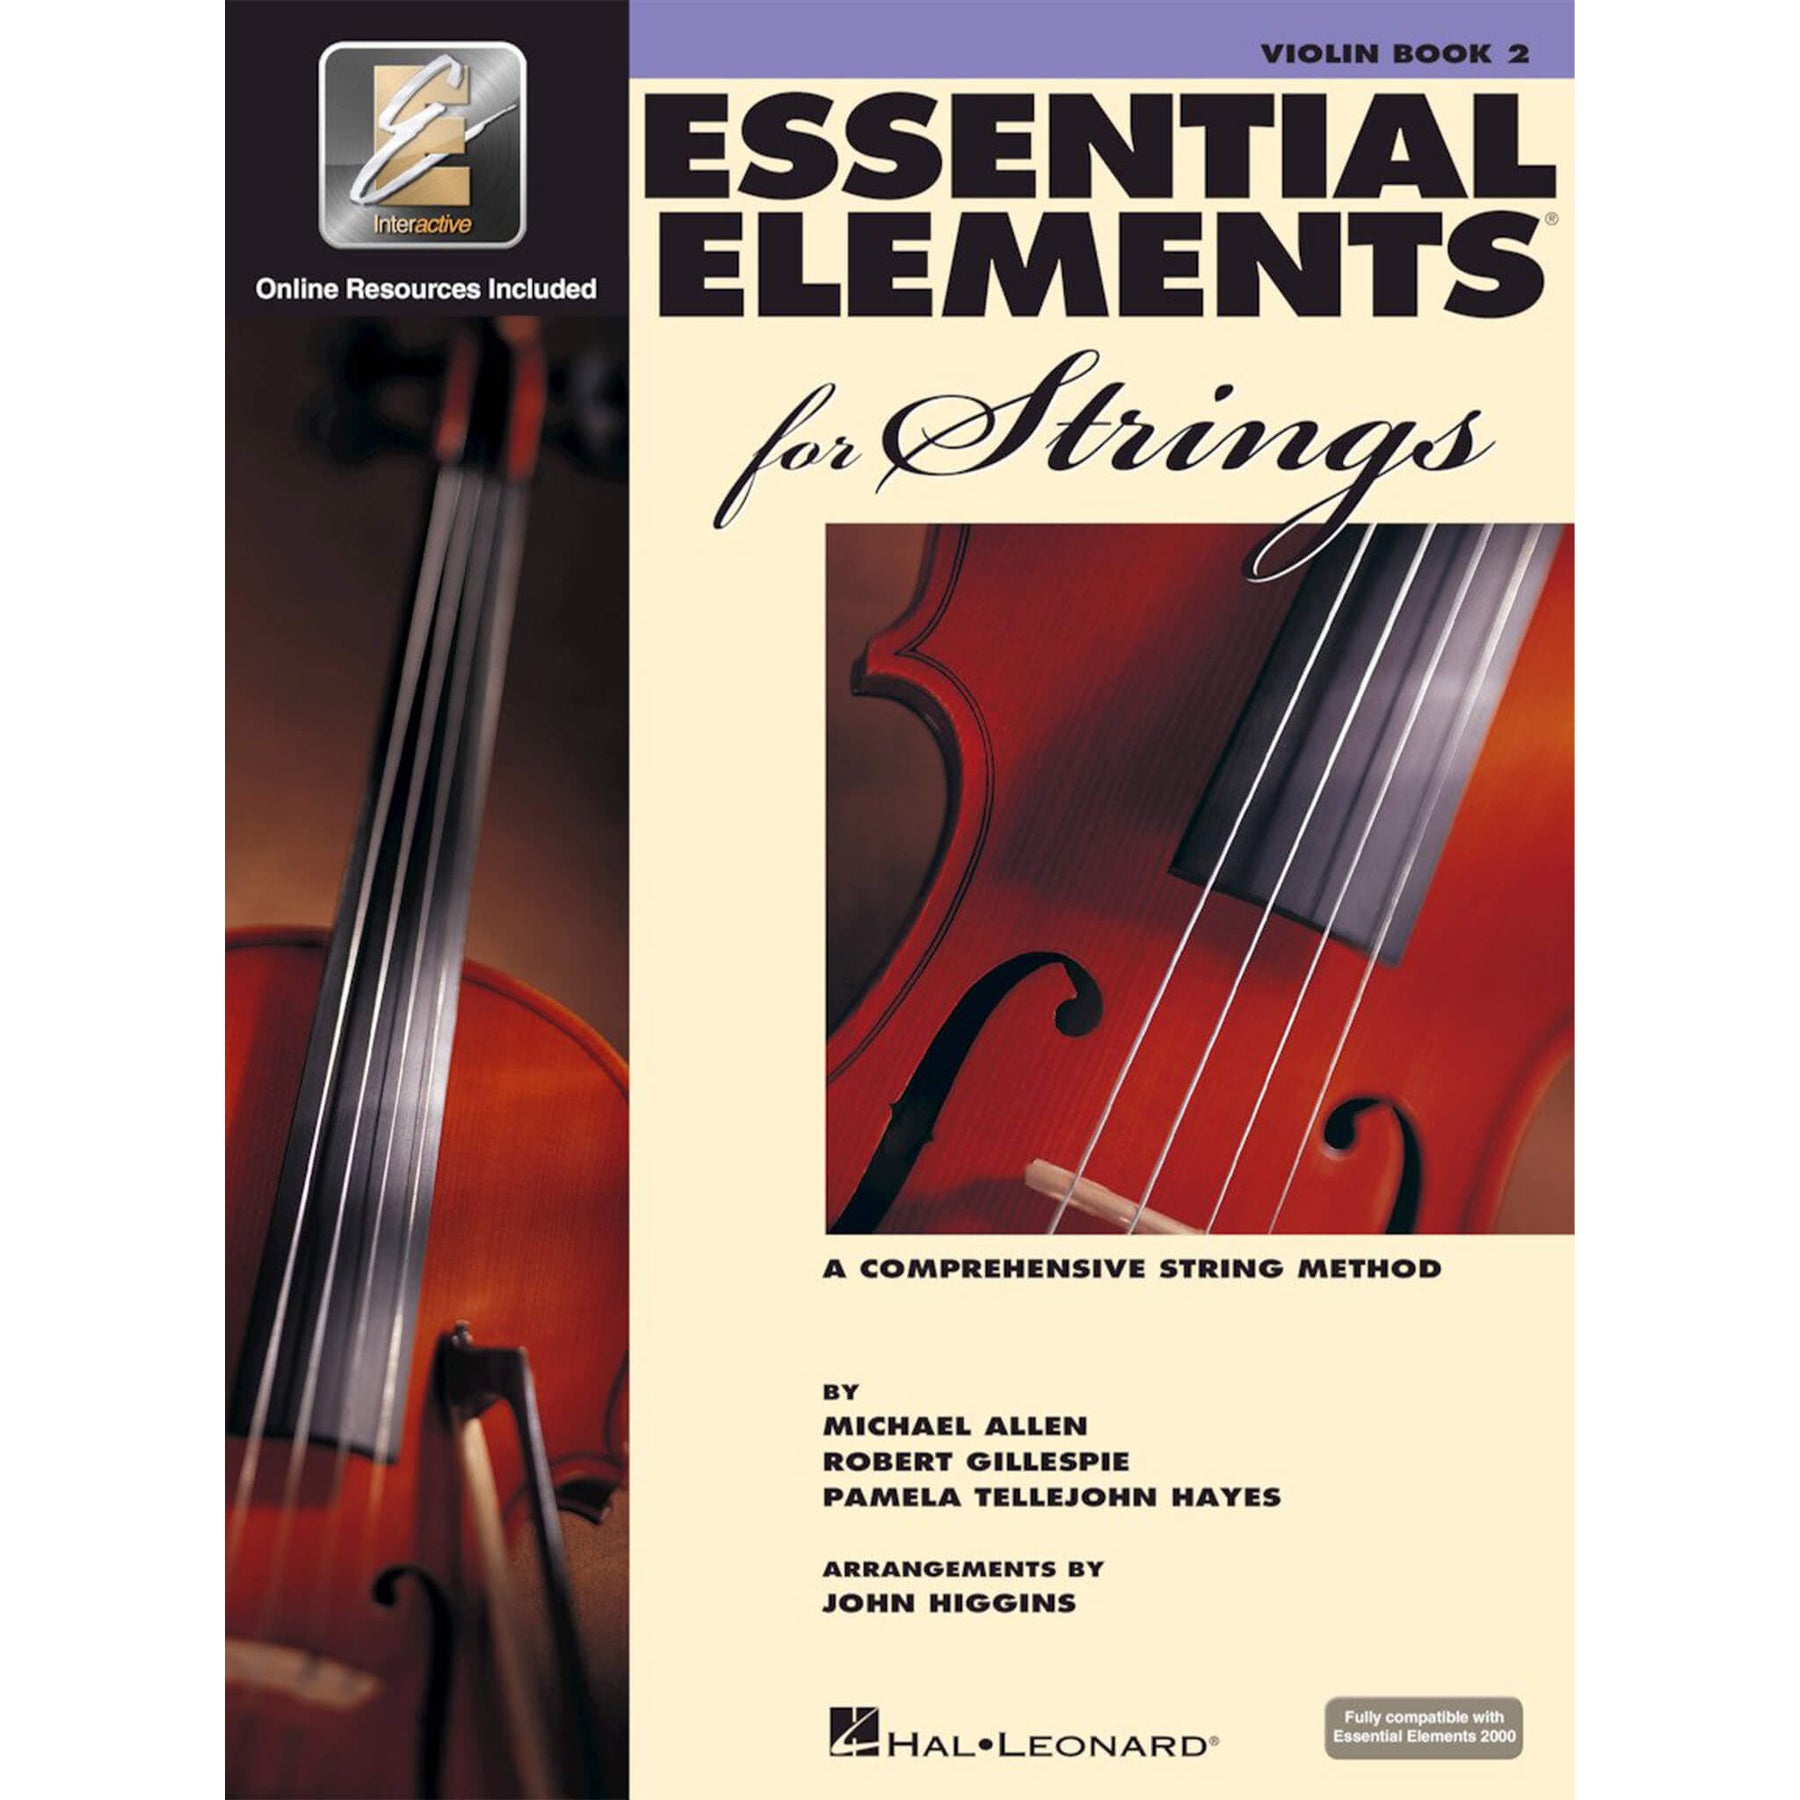 Essential Elements for Strings, Violin Book 2